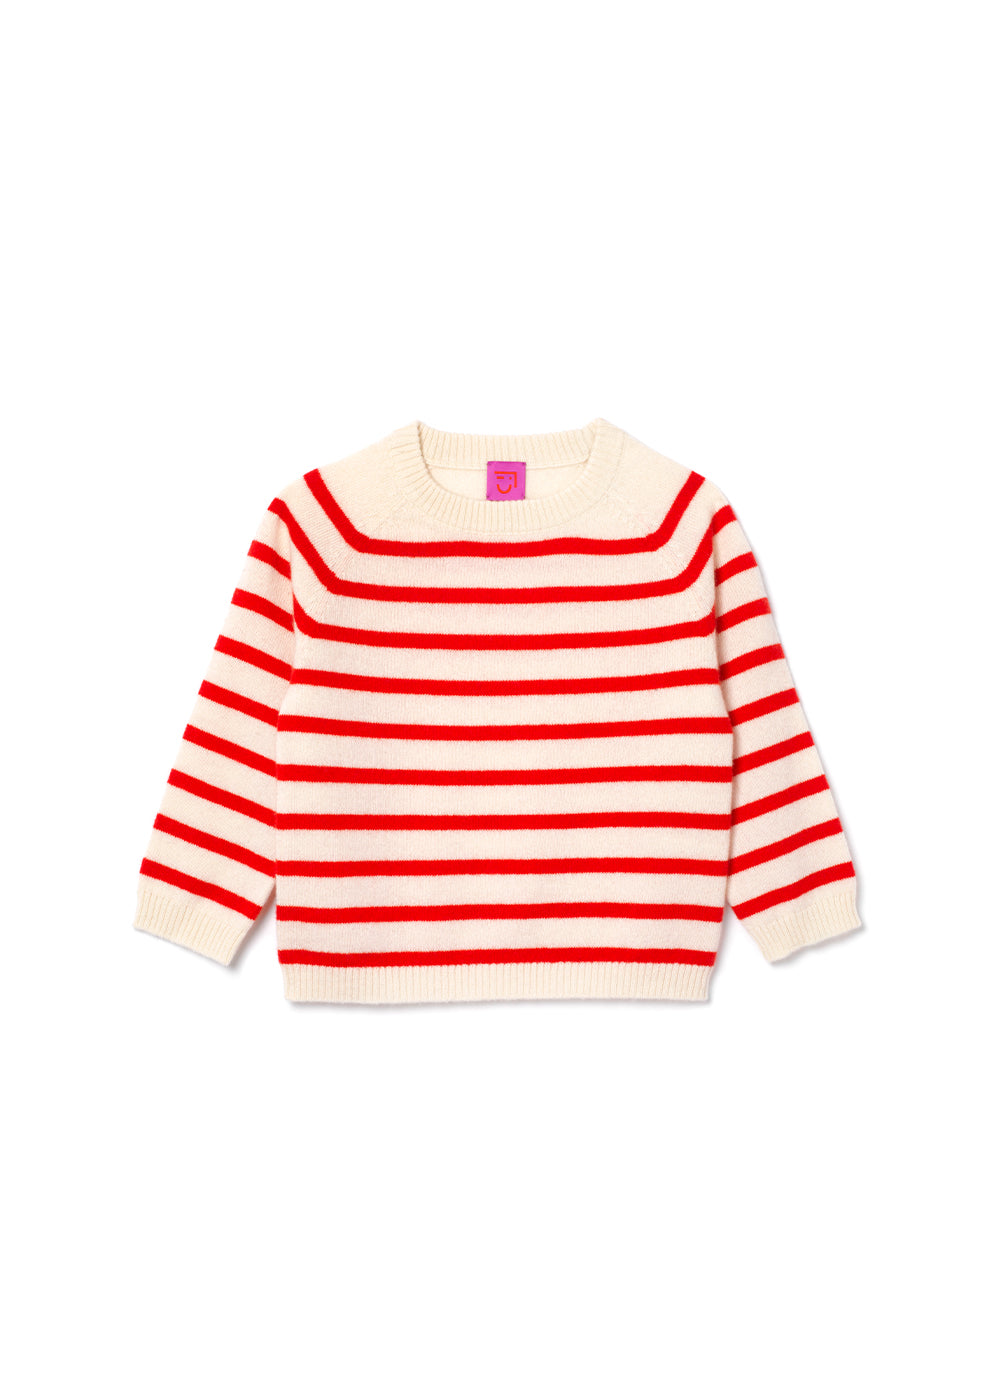 Maisy Striped Jumper - 1Y-2Y / Ivory/Rouge Red Stripes